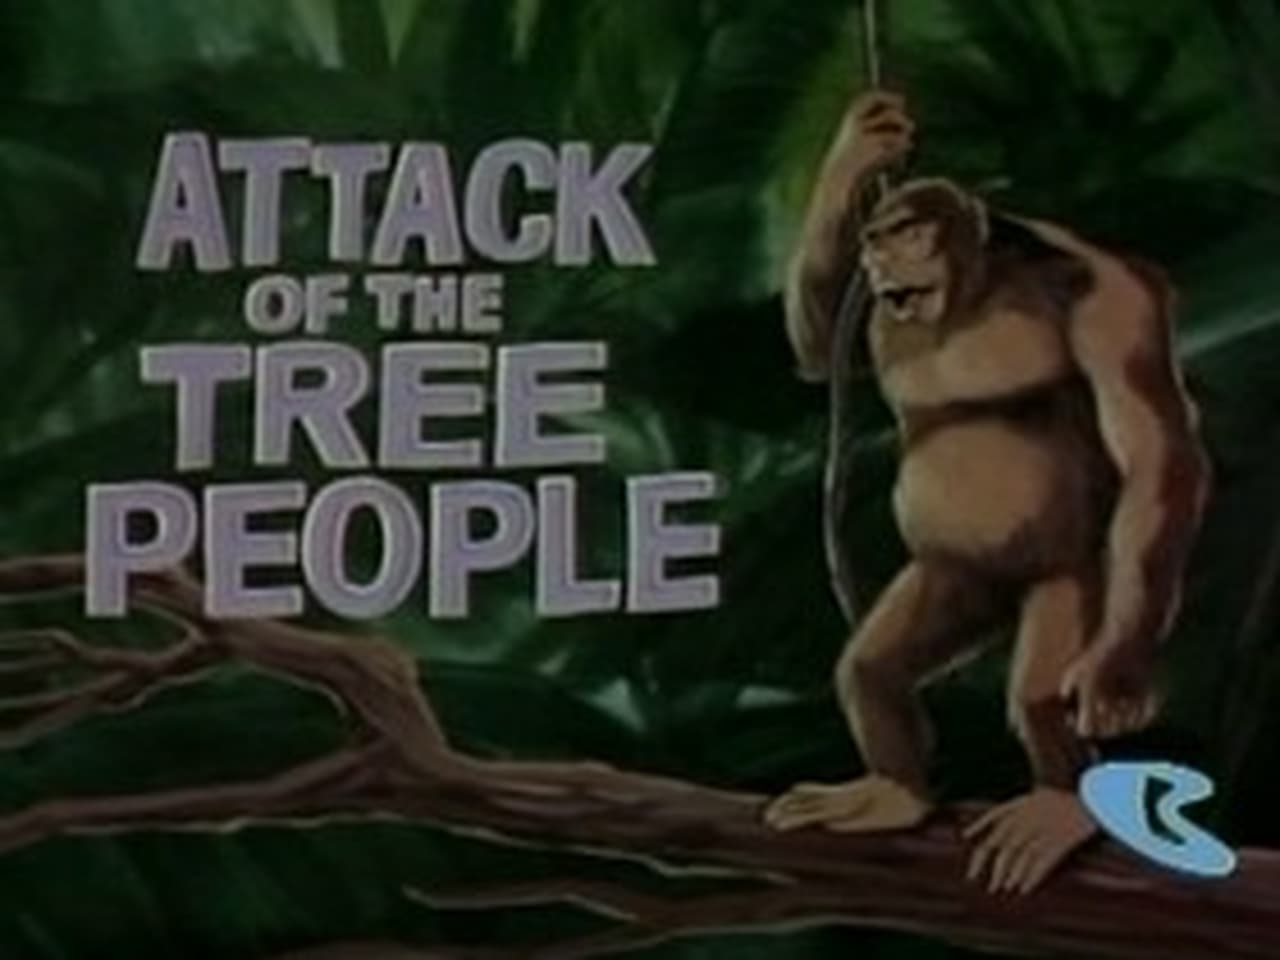 Attack of the Tree People